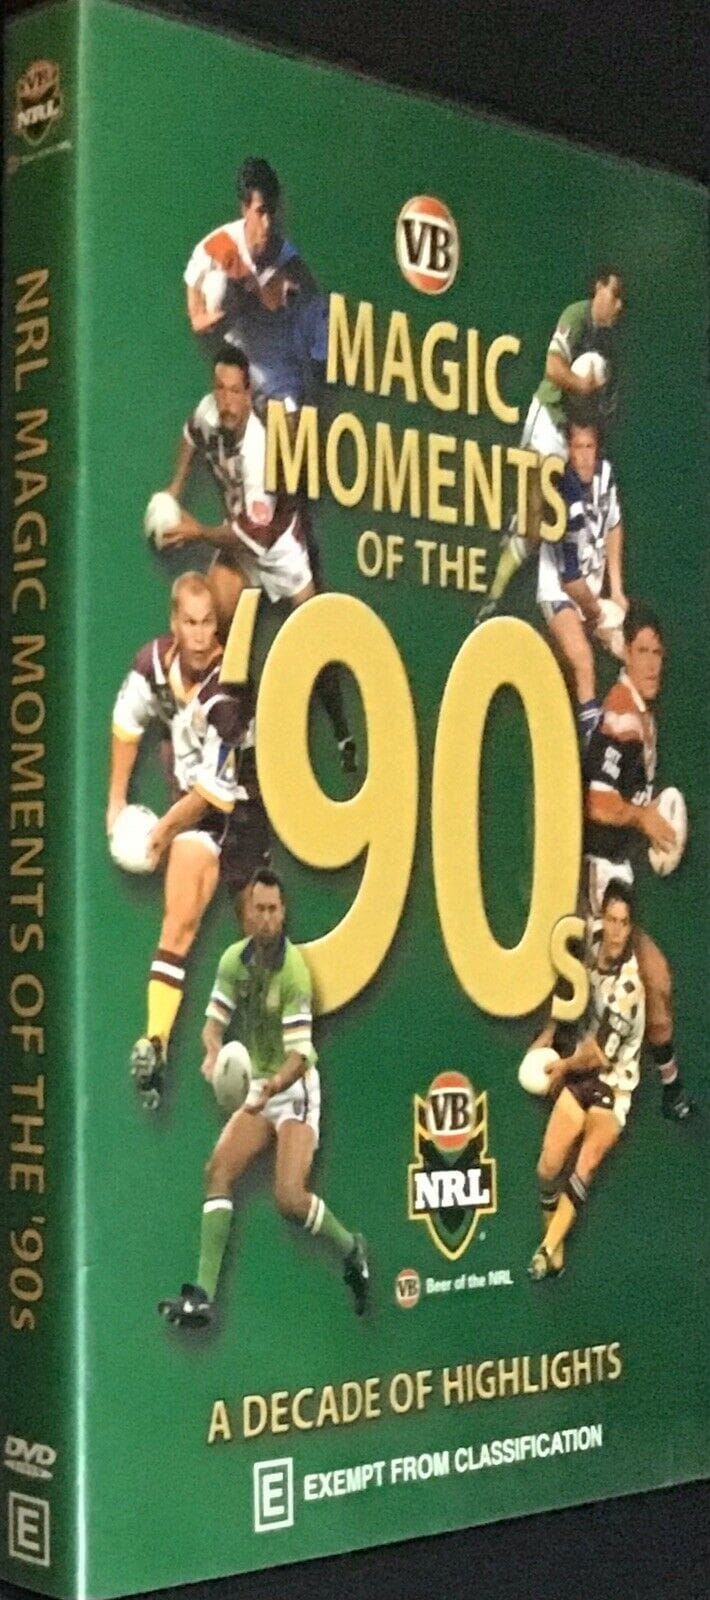 NRL Magic Moments of the '90s - A Decade of Highlights